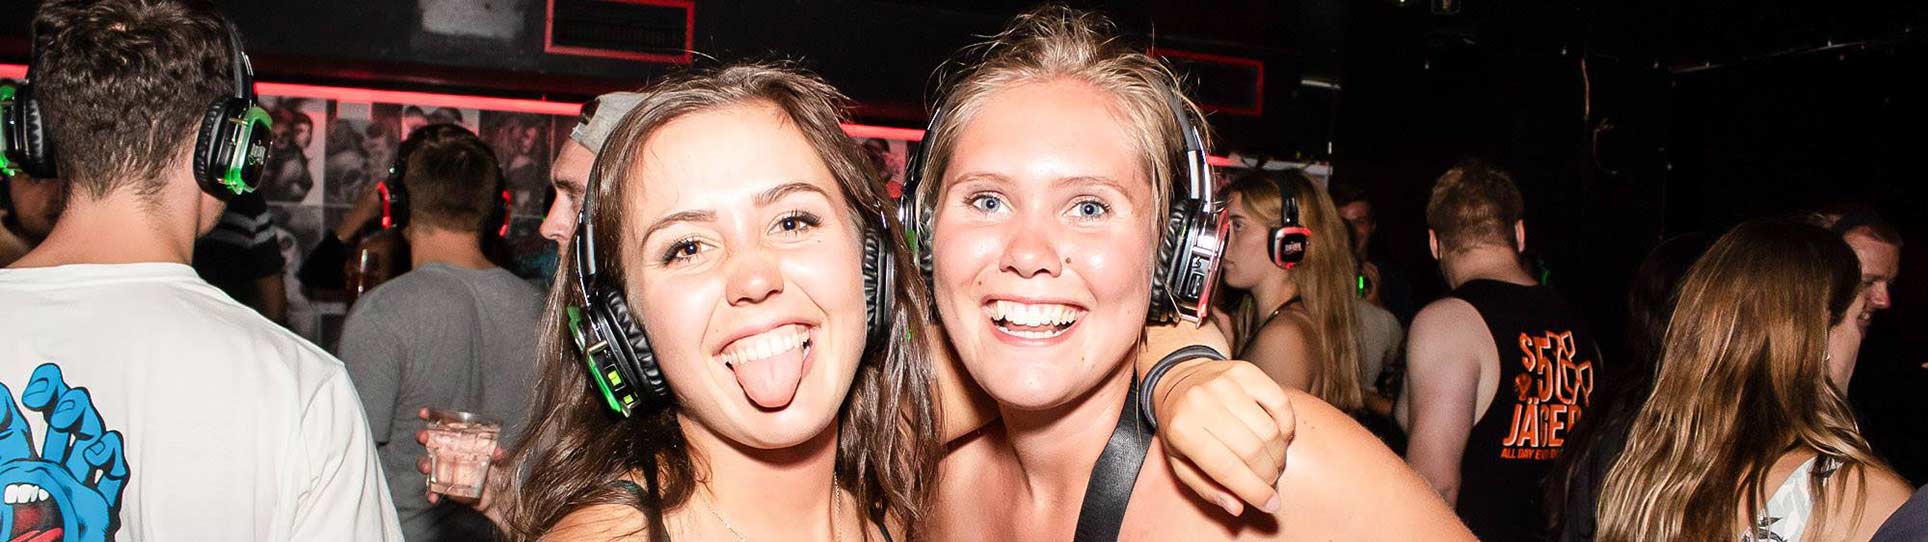 Two girls enjoying the Silent Disco on the Big Night Out Pub Crawl in Queenstown New Zealand on a Wednesday night